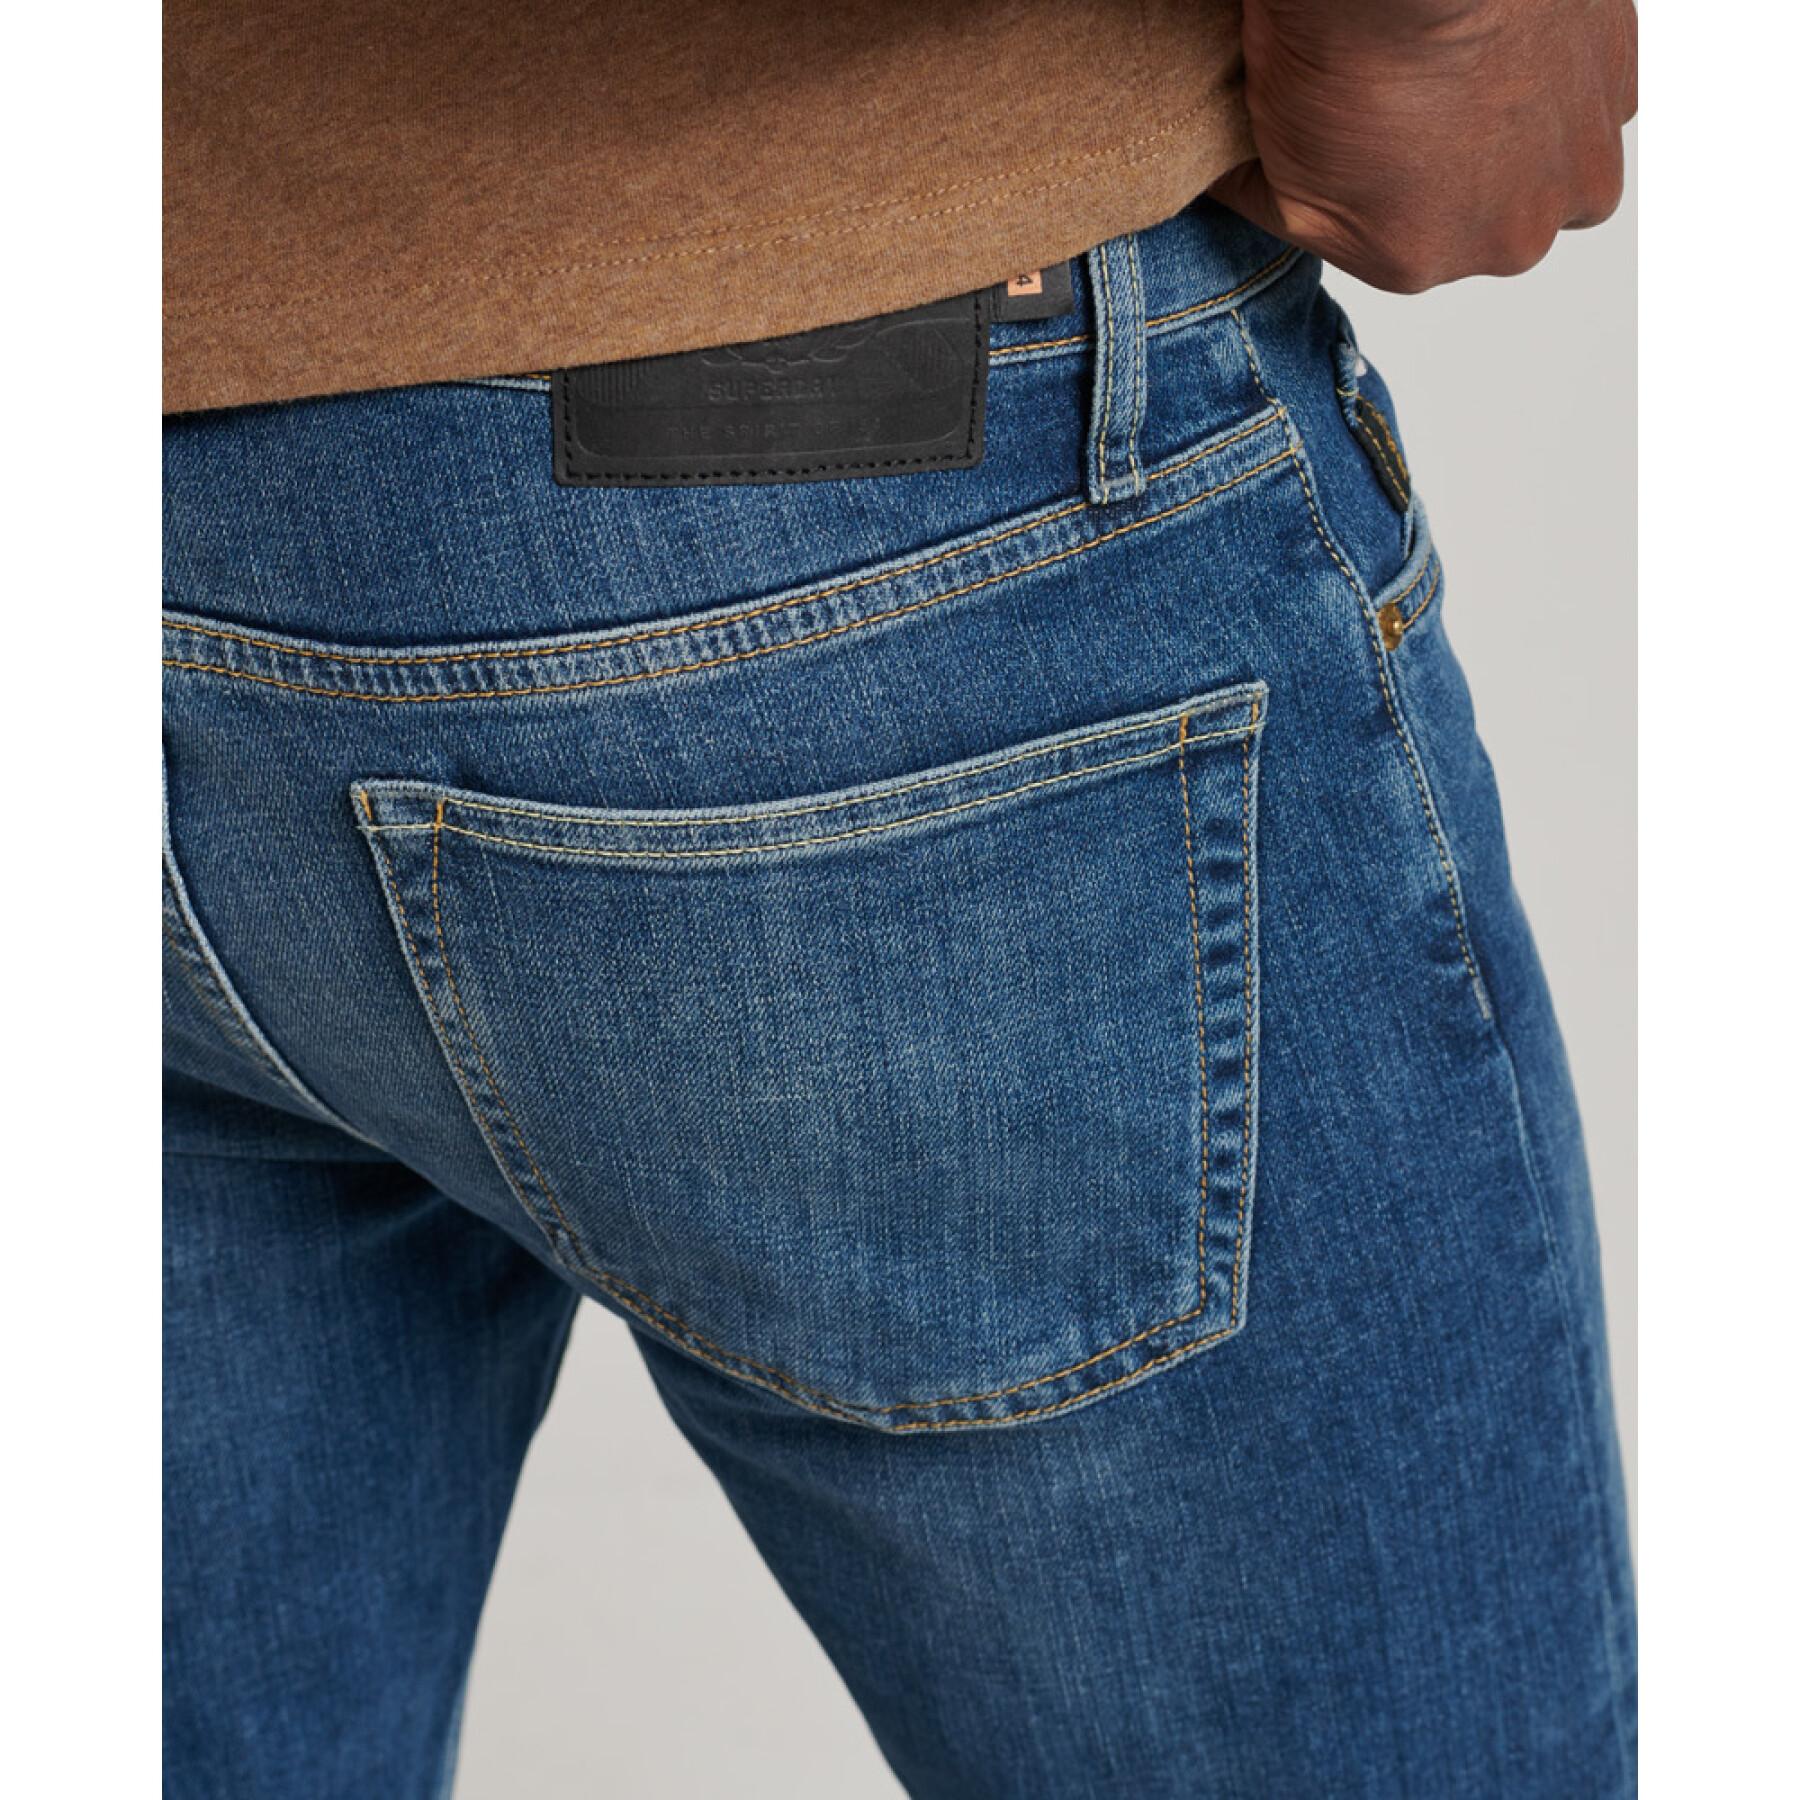 Jeans slim fit in cotone biologico Superdry